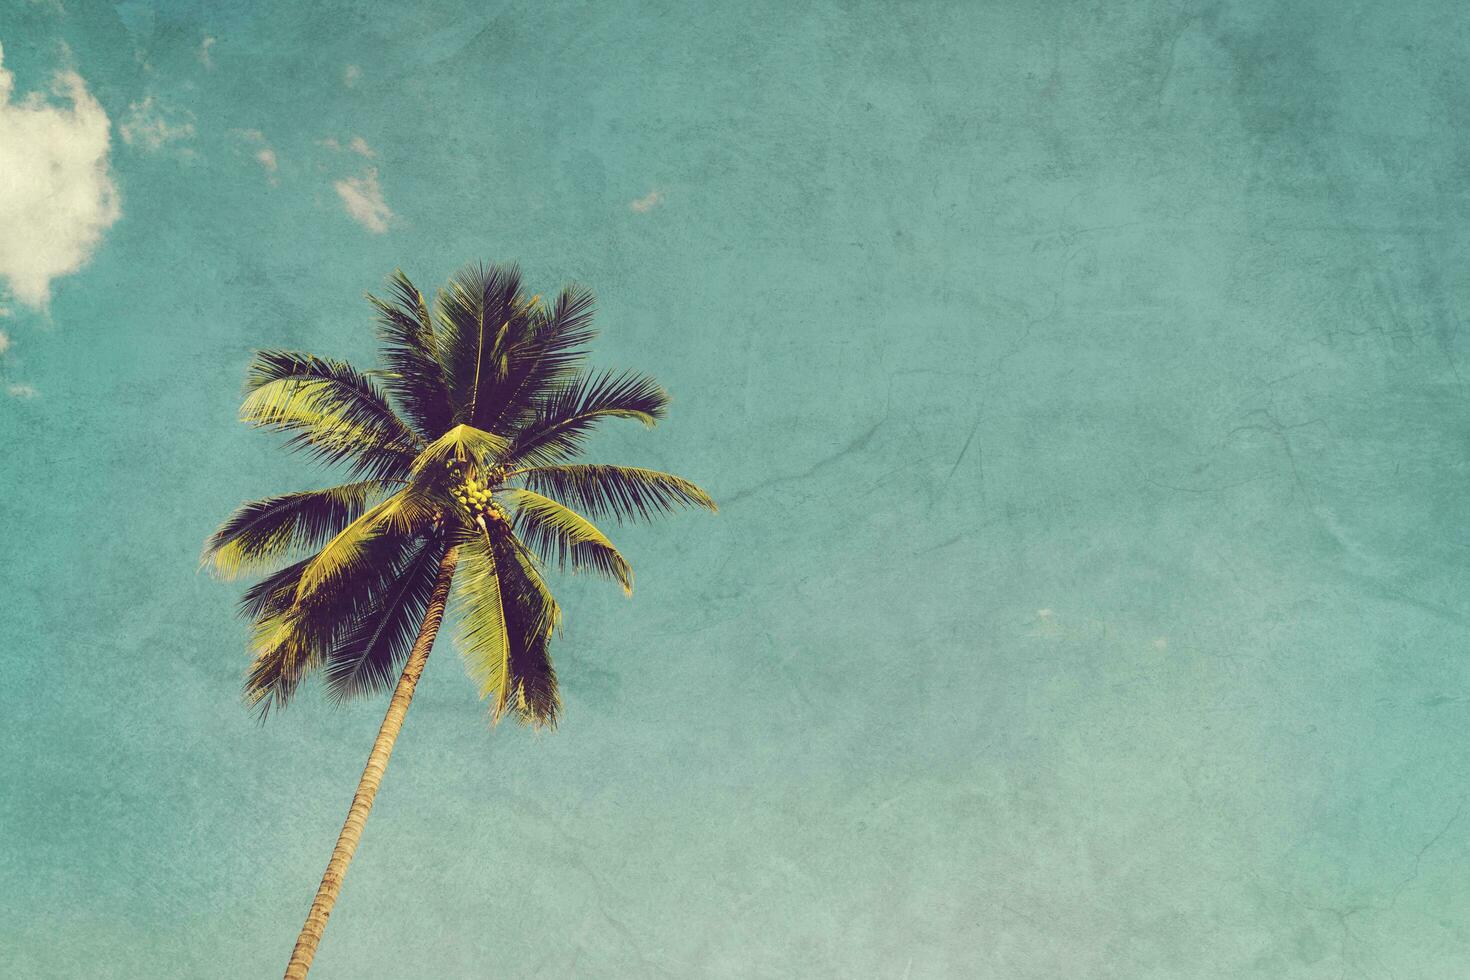 Coconut palm trees and shining sun with vintage effect. photo